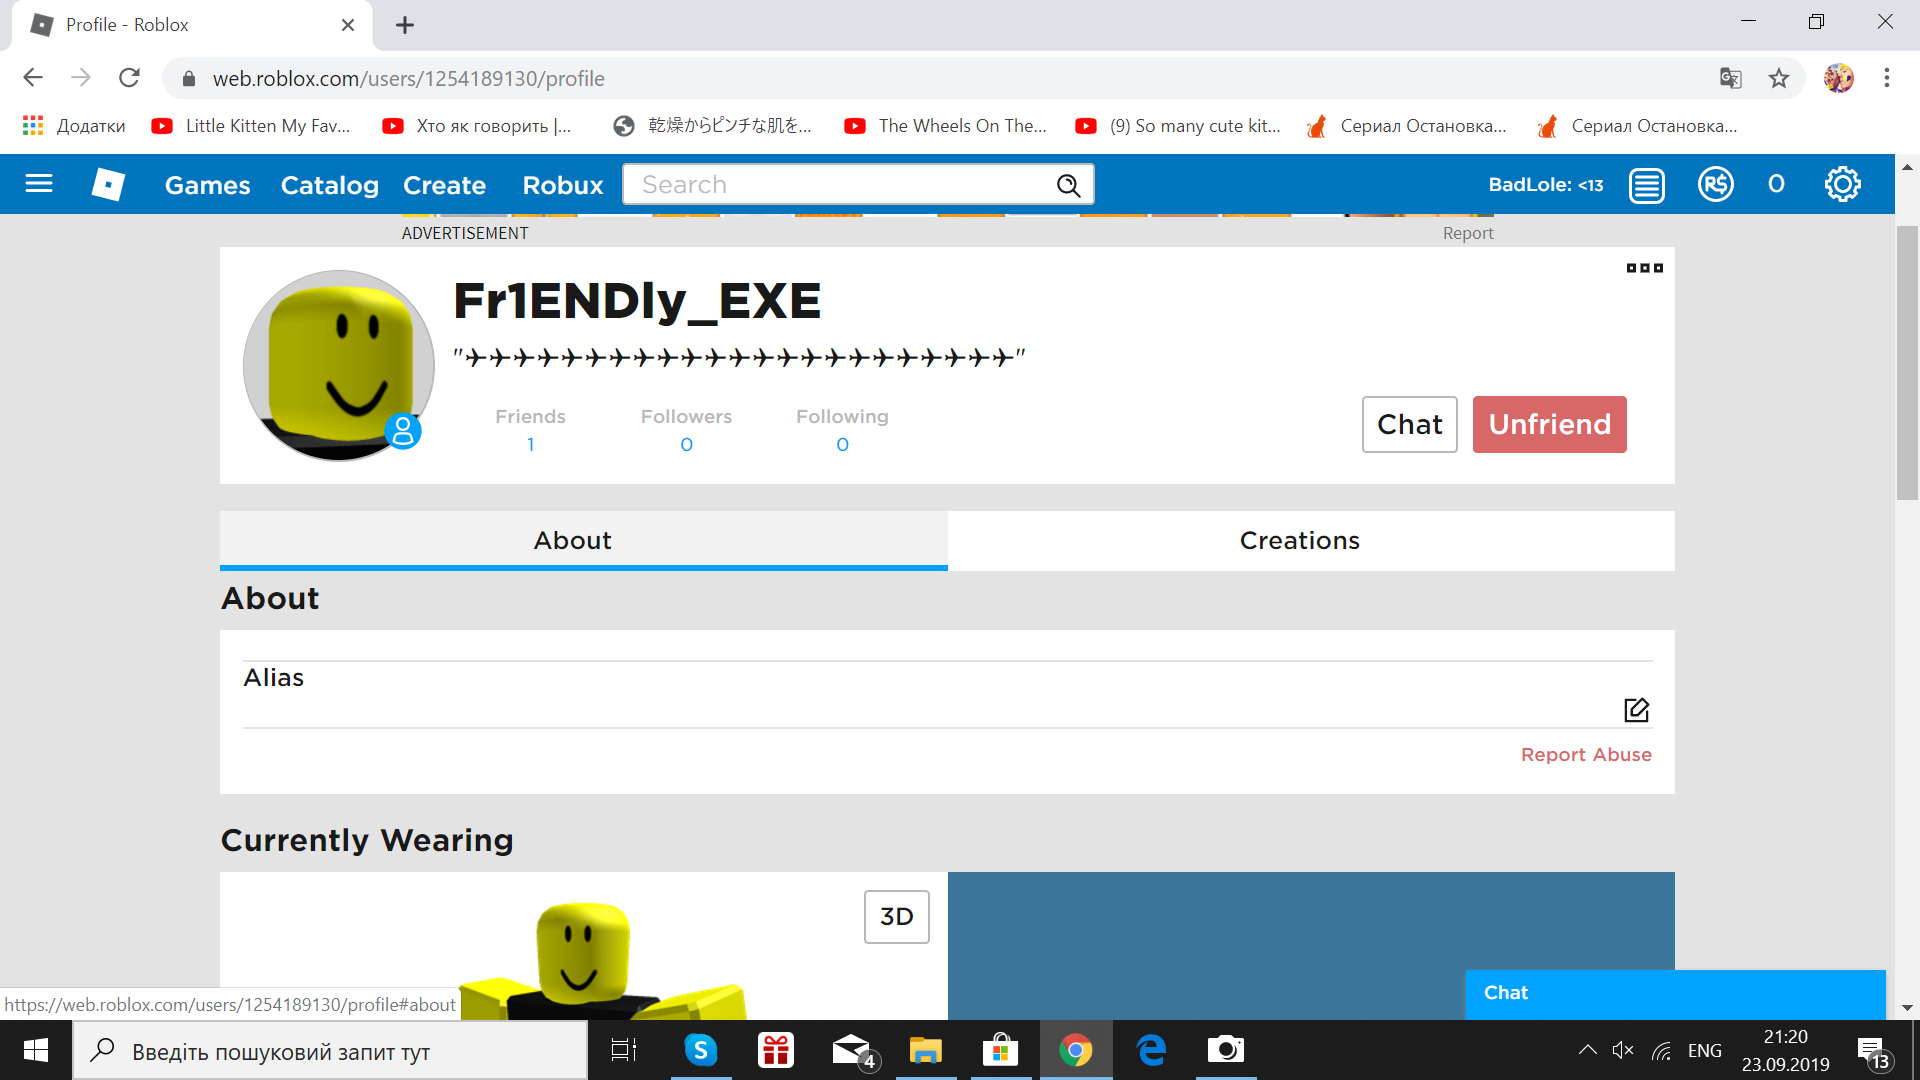 Fr1endly Exe Roblox Creepypasta Wiki Fandom - how old is my account roblox